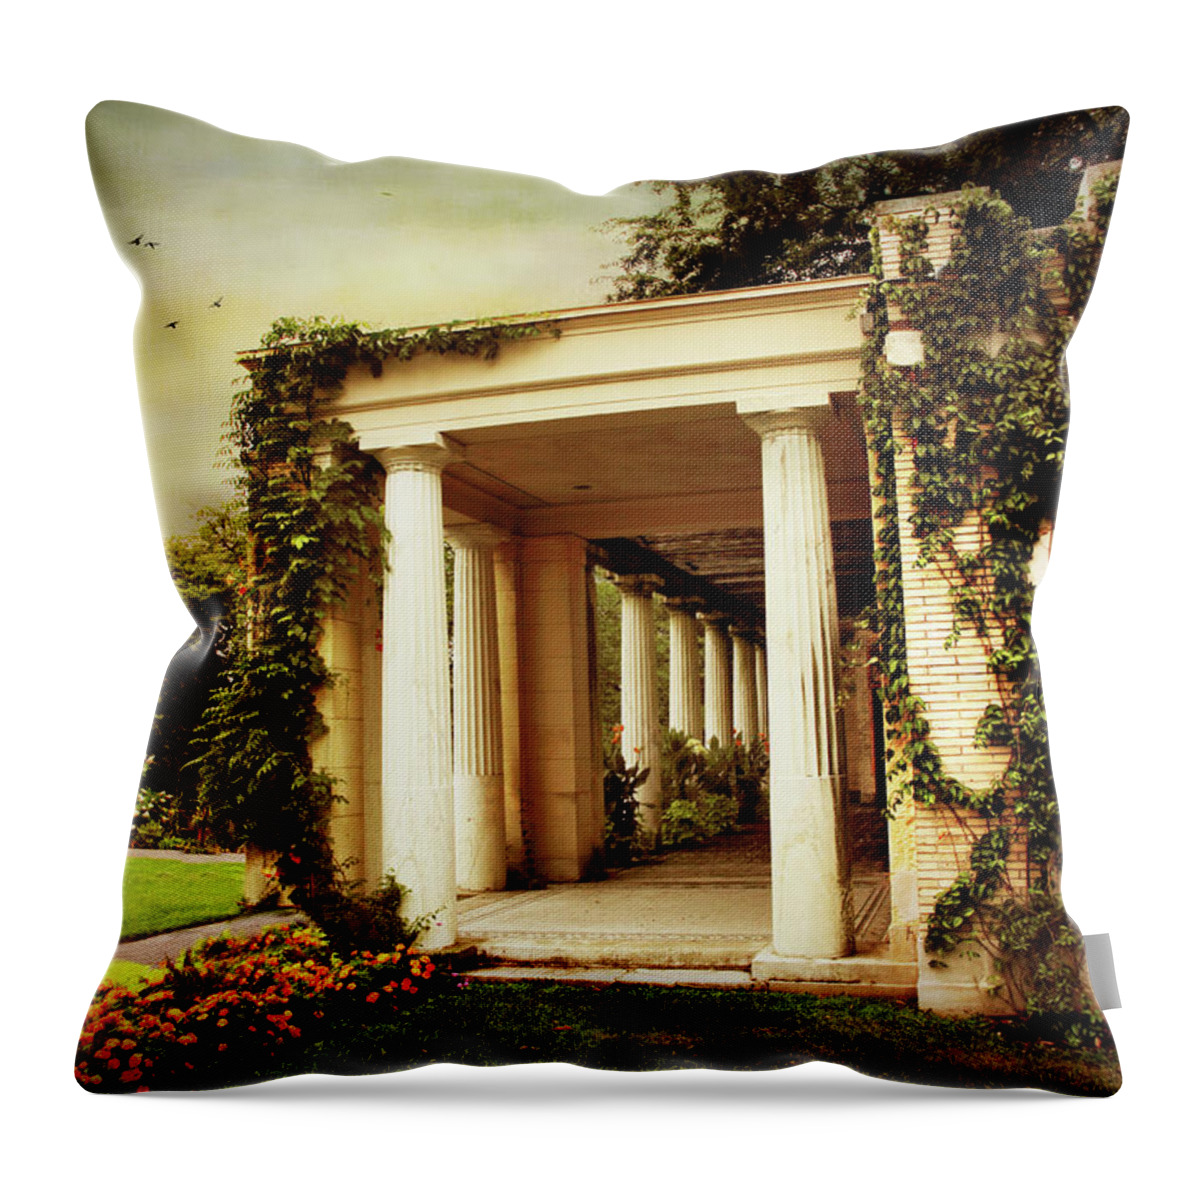 Untermyer Garden Throw Pillow featuring the photograph The Terrace by Jessica Jenney